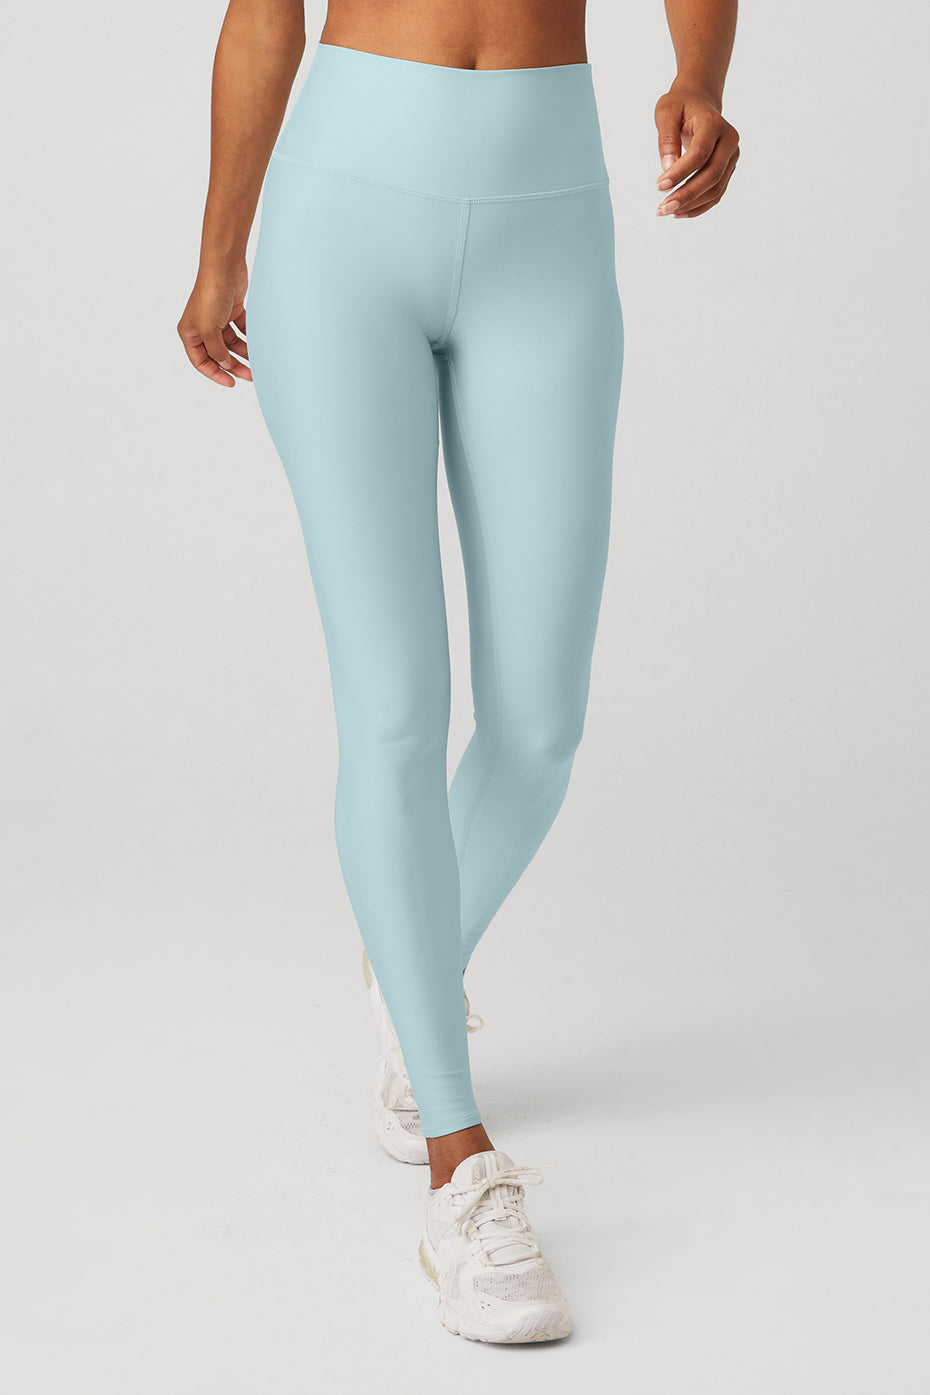 Sexy High Waisted Wetlook Light Blue Leggings With Open Crotch And